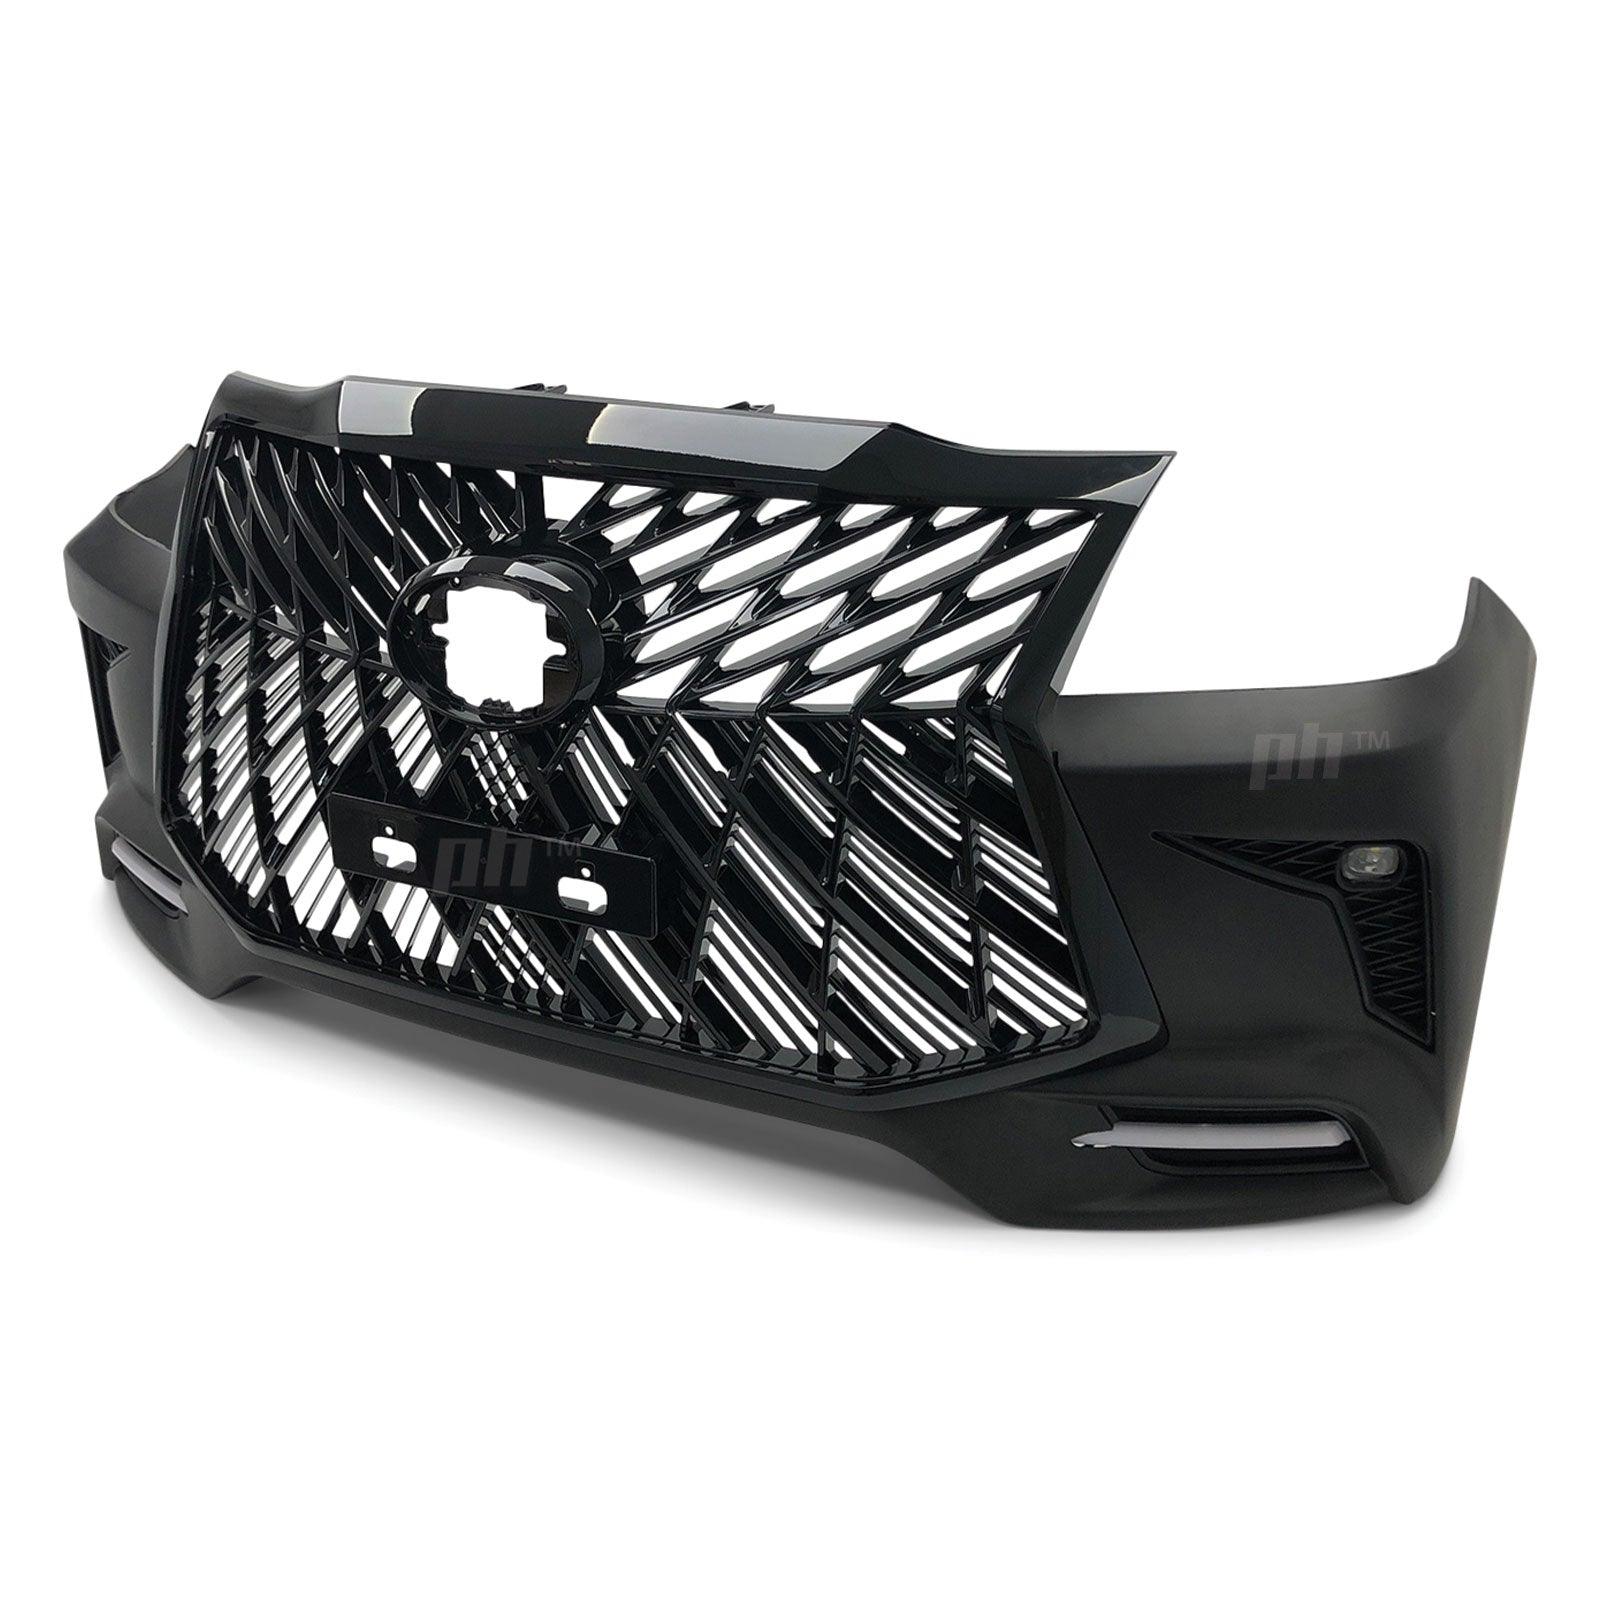 Web Style Front Bumper Kit & Black Grill Fits Toyota Hilux N70 Facelift 11 - 15 - 4X4OC™